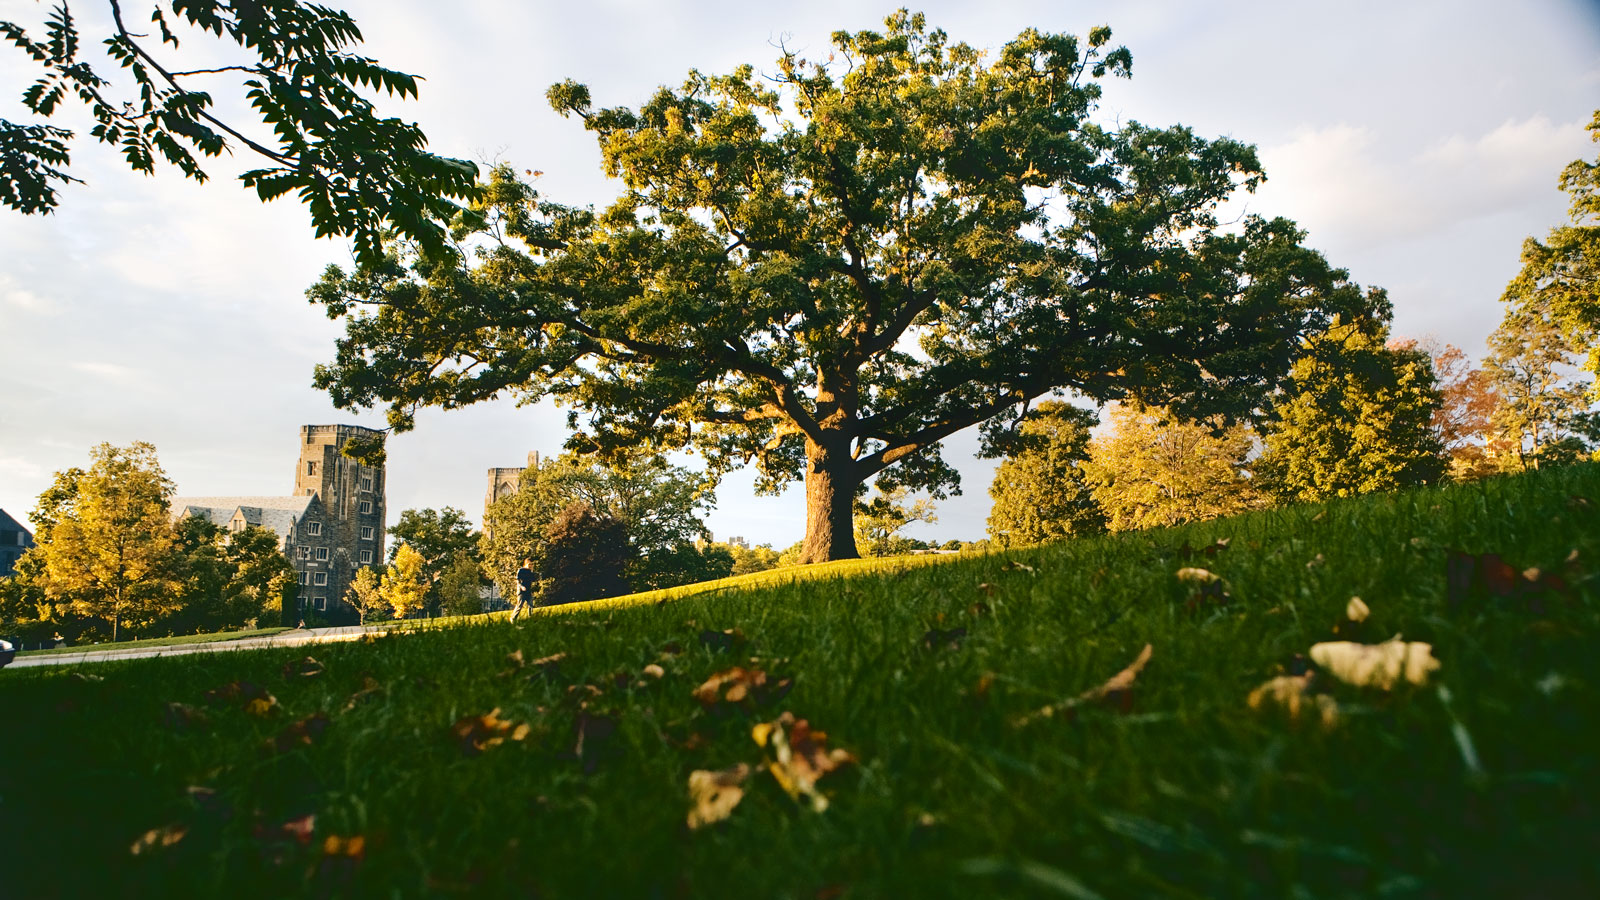 The oak looks almost diminutive in this wide shot with early fall leaves in the extreme foreground